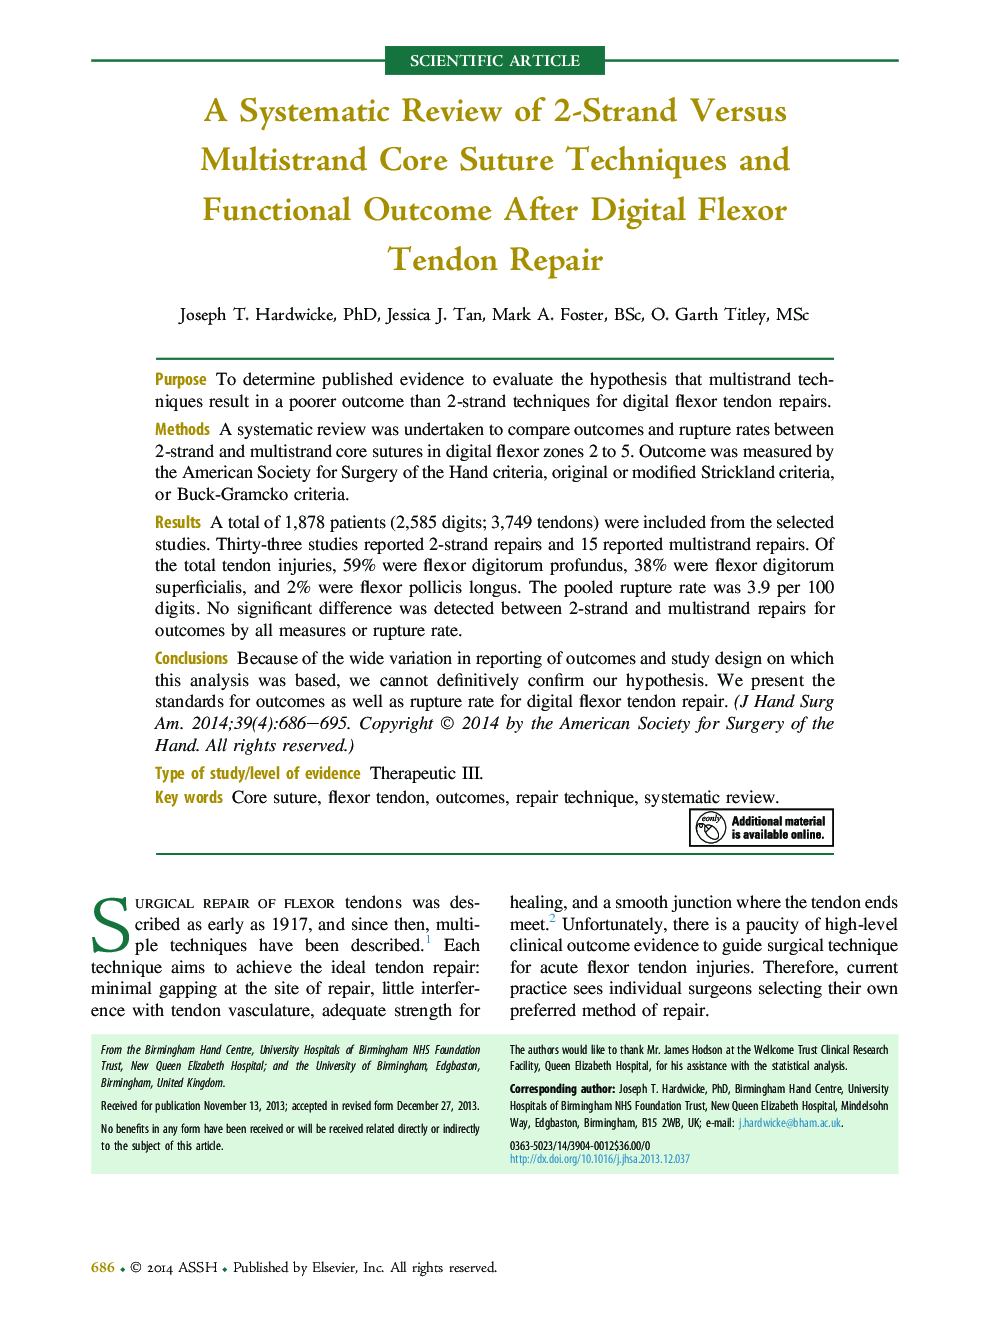 A Systematic Review of 2-Strand Versus Multistrand Core Suture Techniques and Functional Outcome After Digital Flexor Tendon Repair